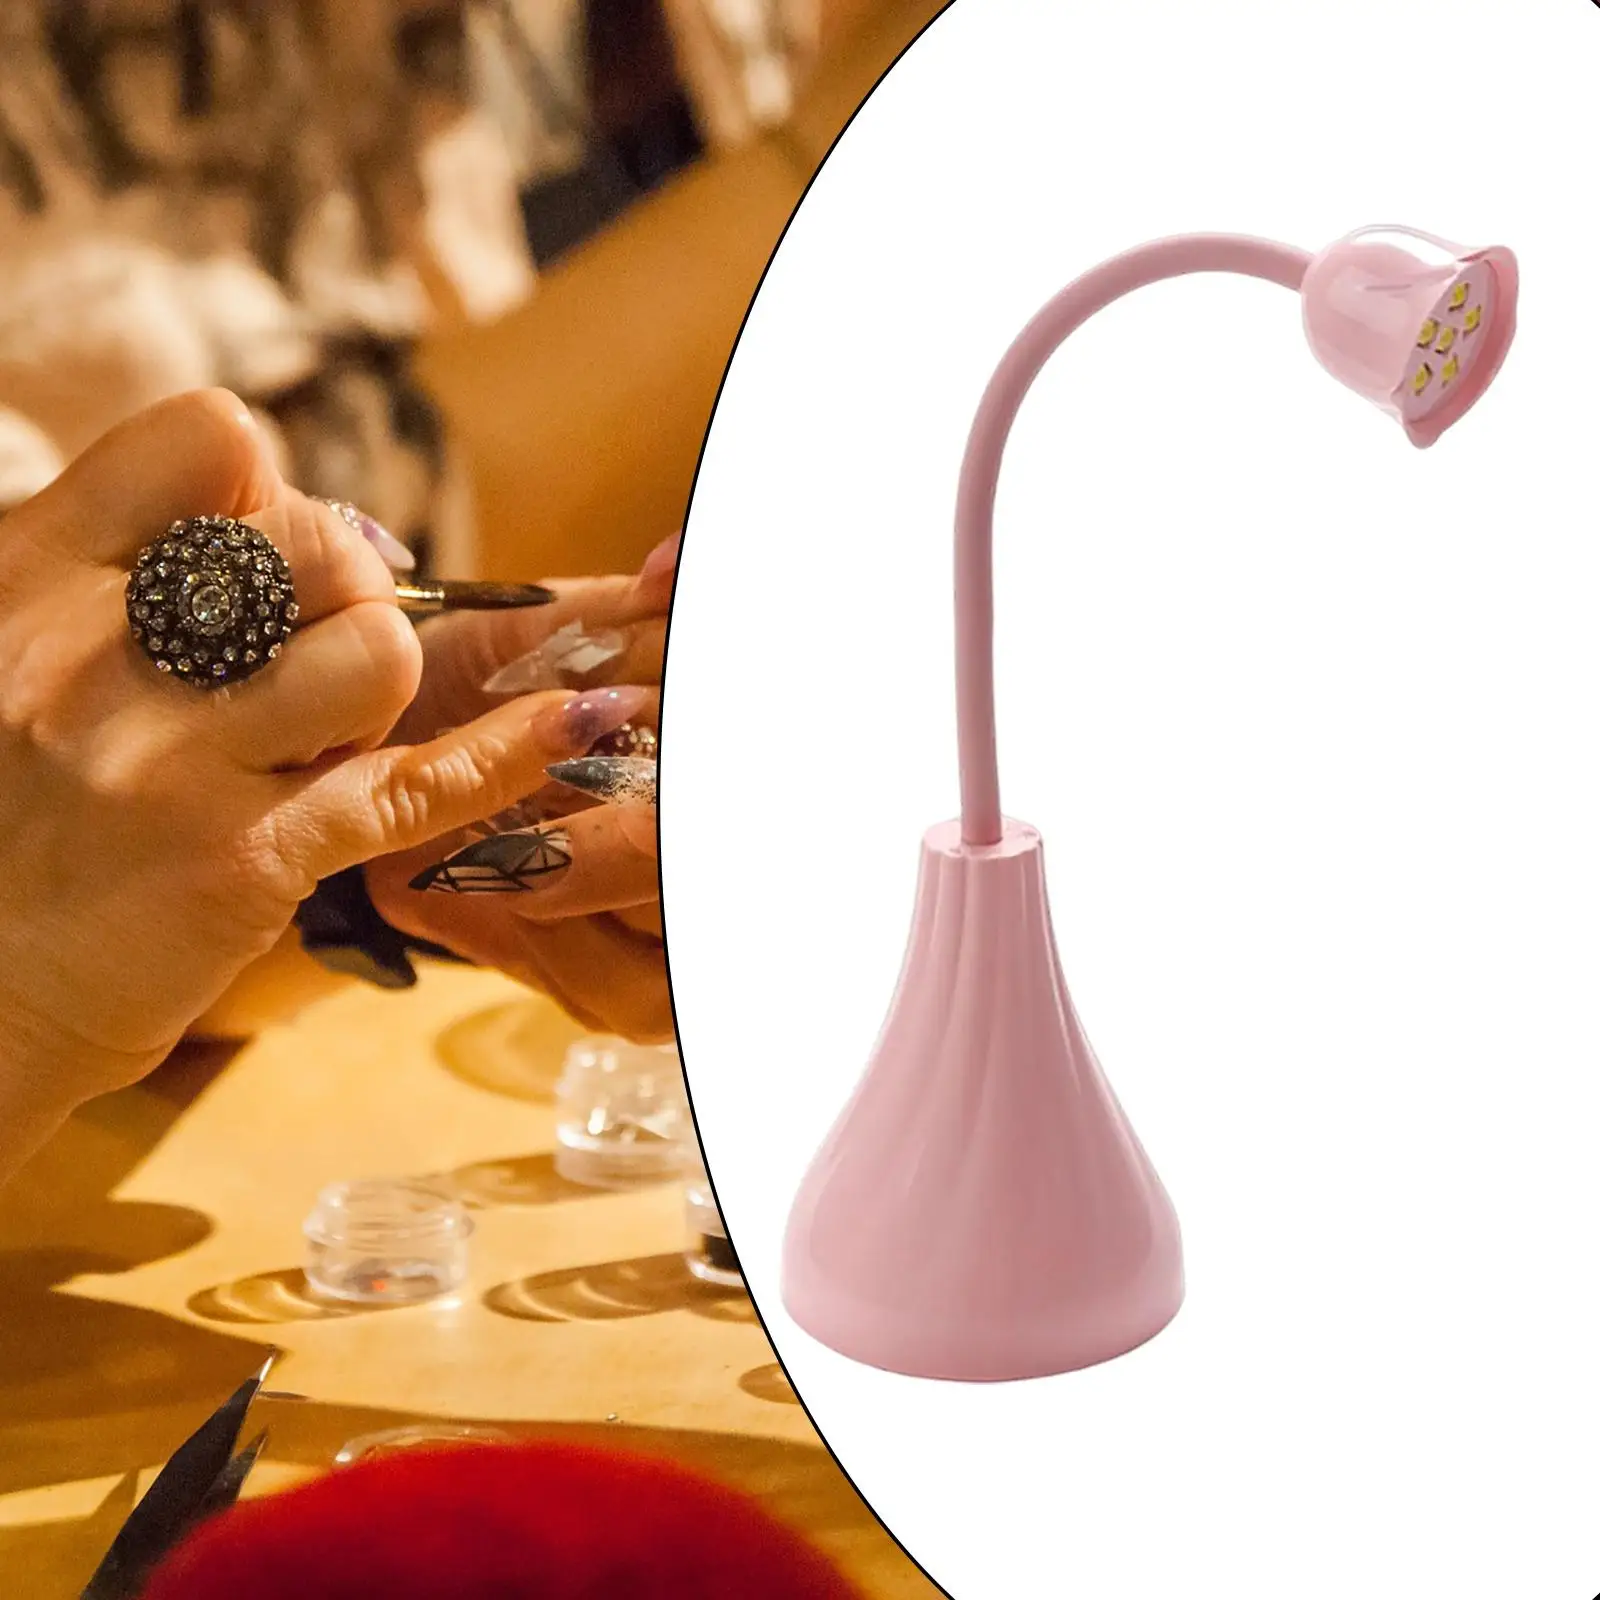 Nail Lamp Nail Art Tools Dryer 6 Hours USB Charging Beauty Accessories for Girls Hands and Feet